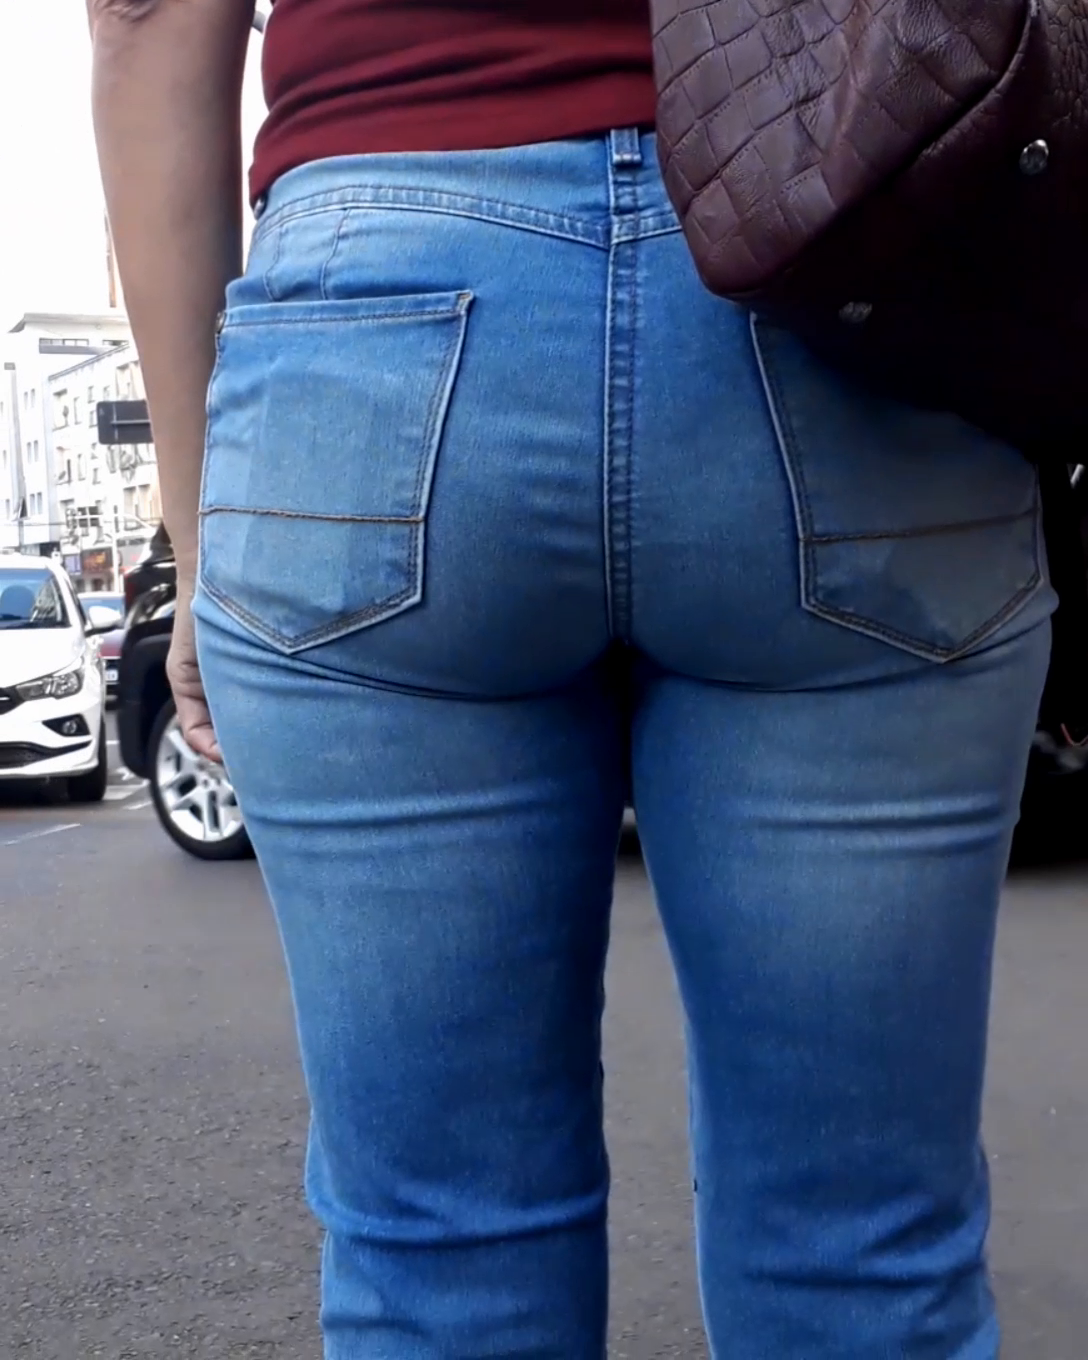 Candid Milf Ass in Tight Jeans - Porn picture